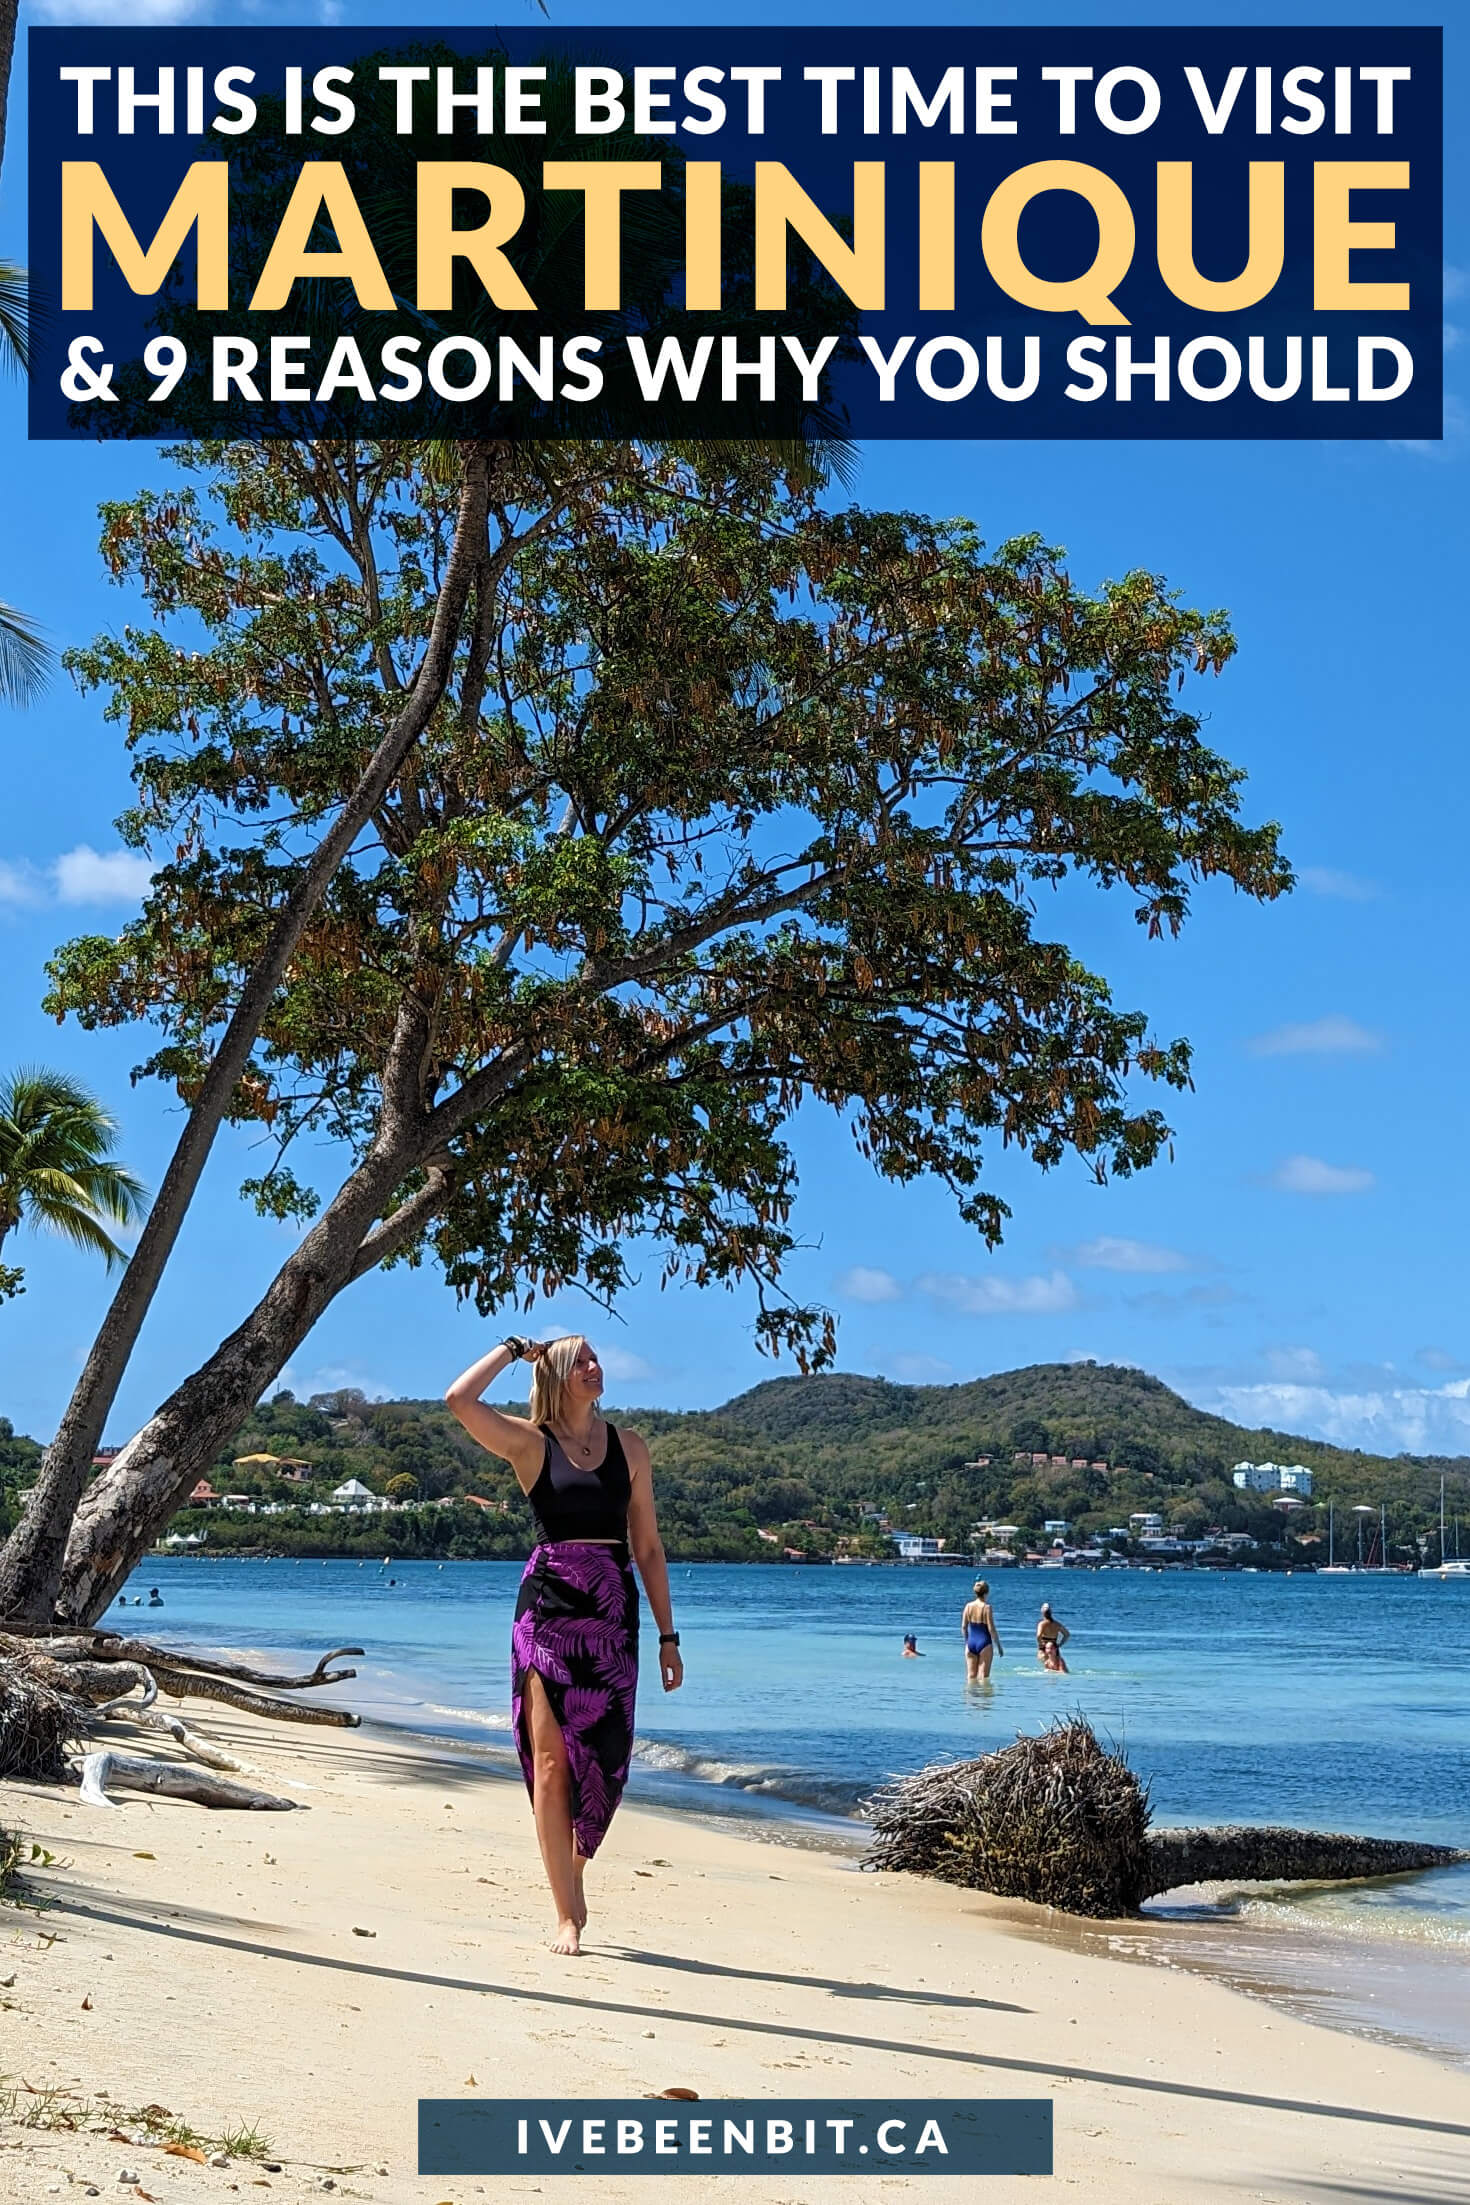 Martinique is a magial destination that everyone must visit. However like any tropical island, there's good and bad times to visit. Check out my guide to see when the best time to travel to Martinique is! | Martinique Travel Guide | Traveling to Martinique | Best Things to Do in Martinique | Martinique Island | Martinique Tourism | Top Martinique Things to Do | Lesser Antilles Islands | Caribbean Travel | Caribbean Travel Destinations | IveBeenBit.ca